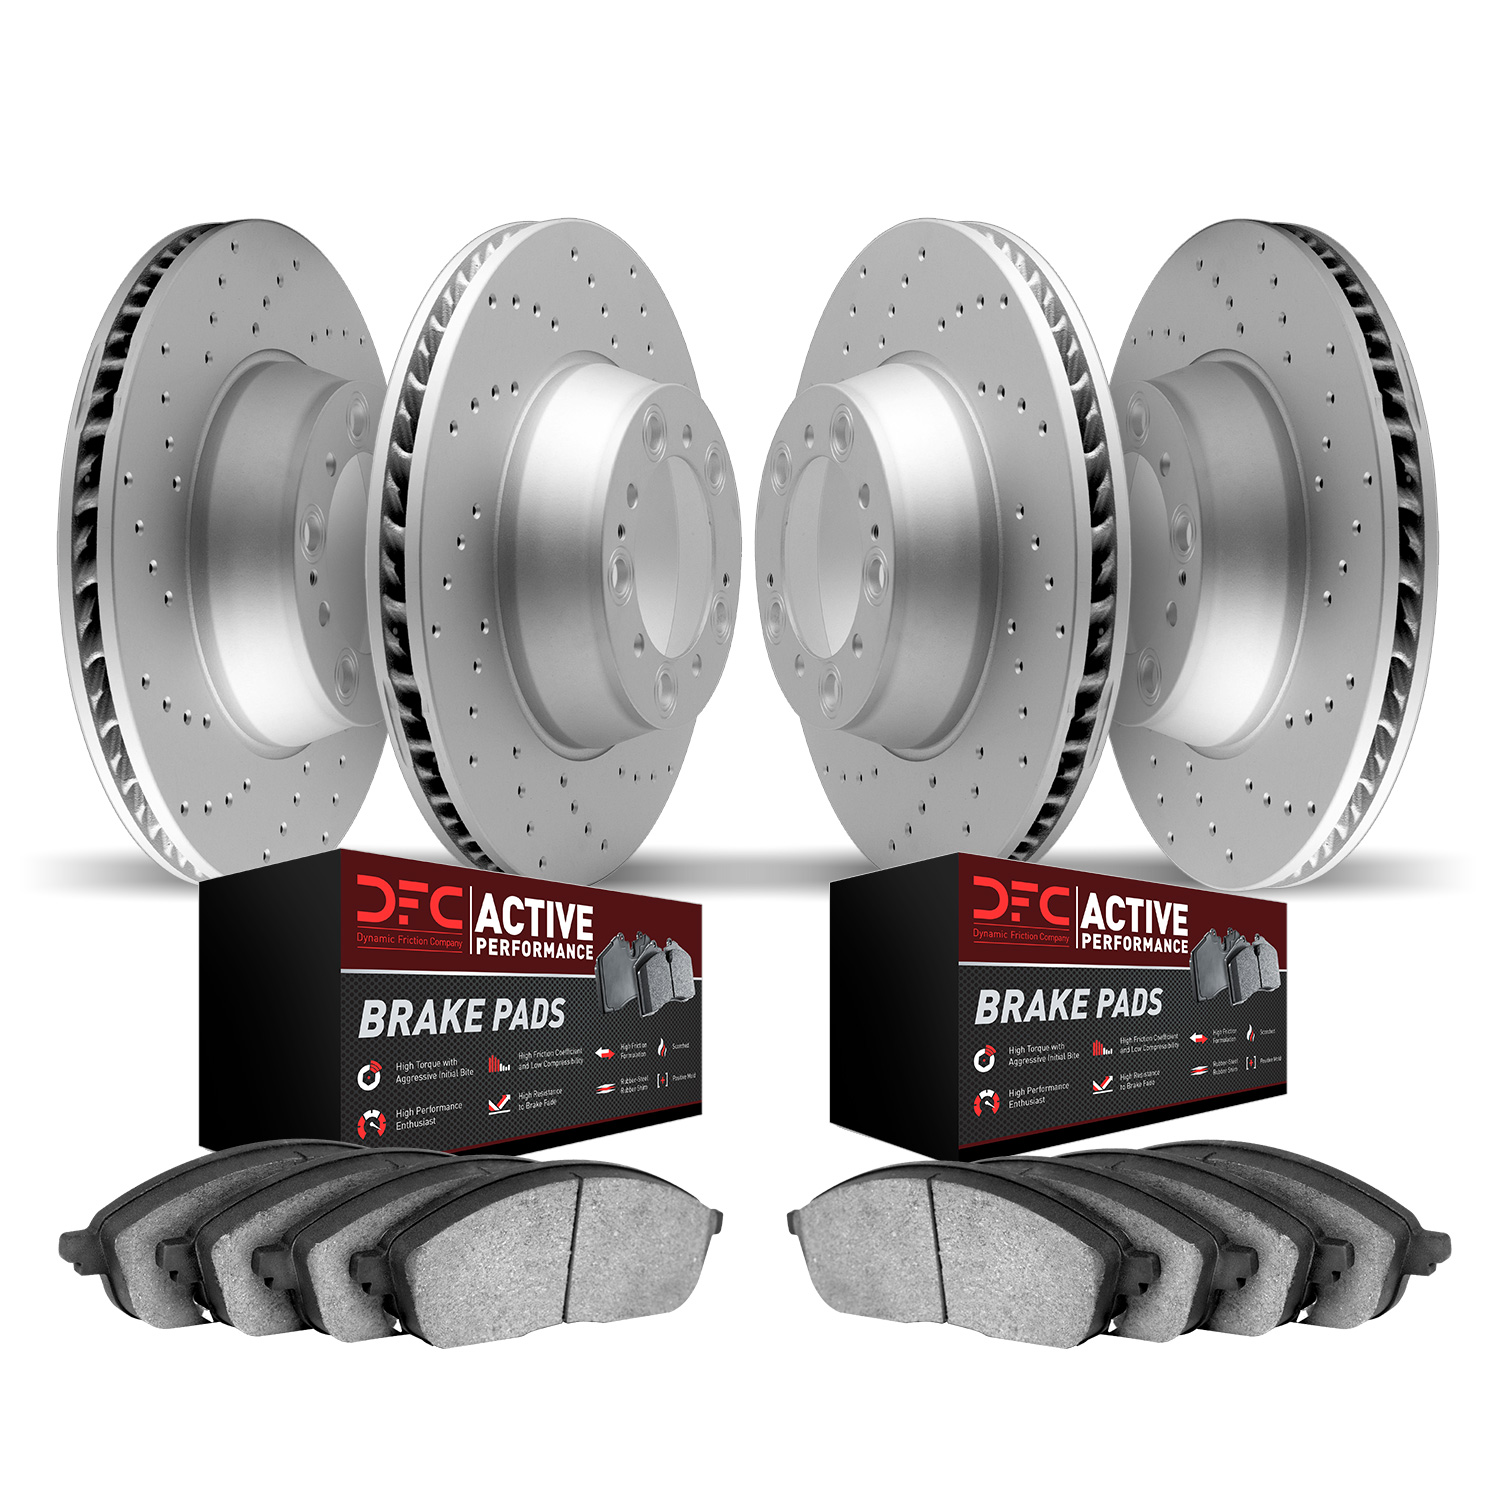 2704-13048 Geoperformance Drilled Brake Rotors with Active Performance Pads Kit, 2005-2009 Subaru, Position: Front and Rear